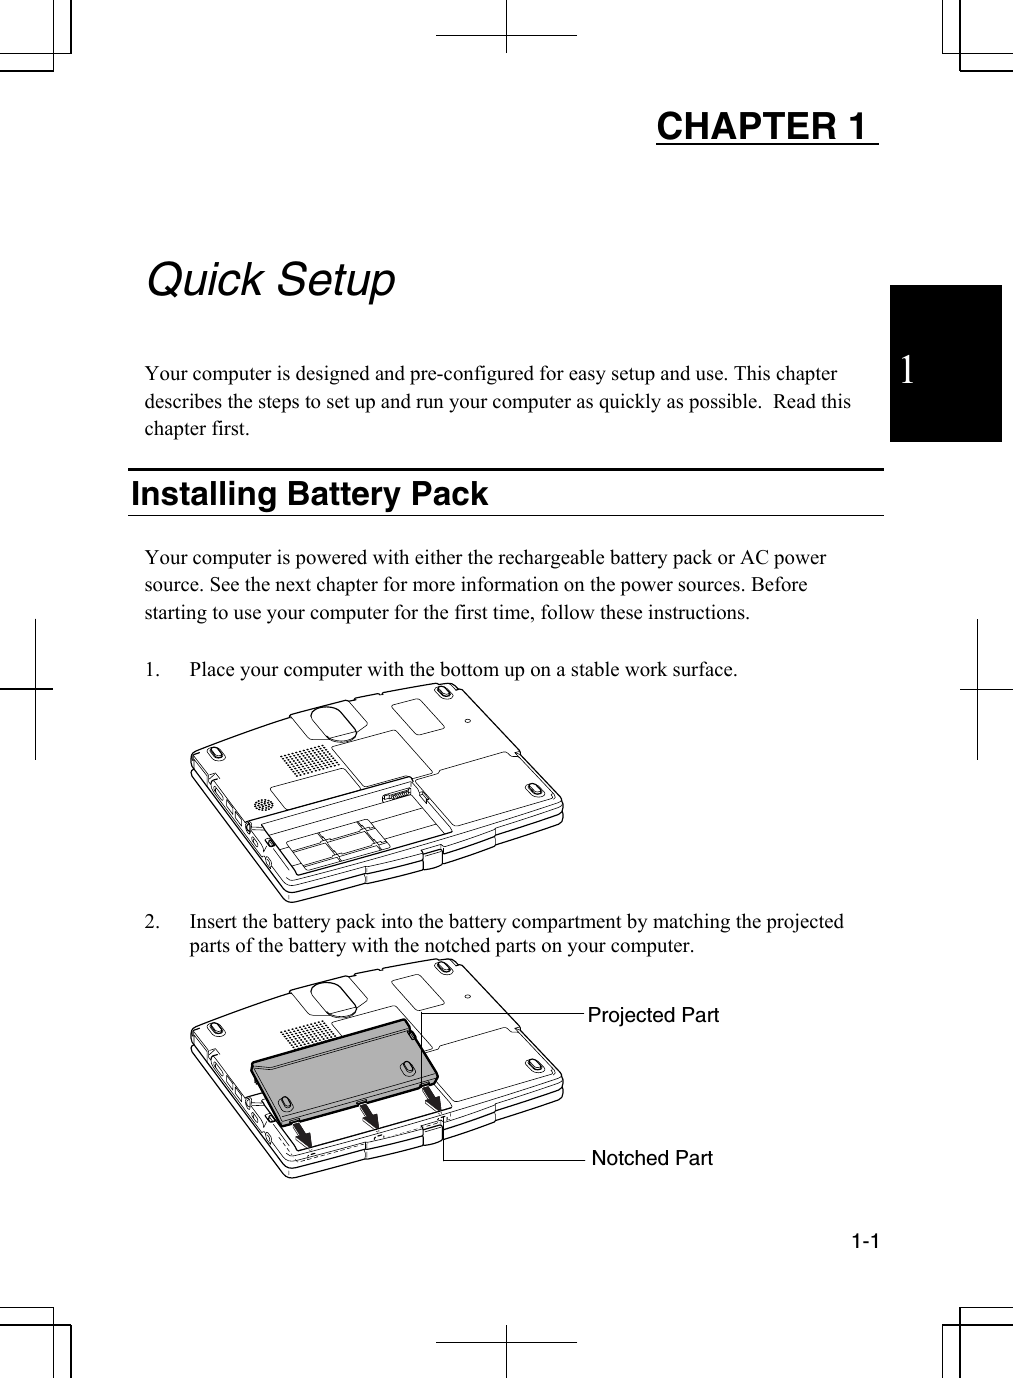 1  1-1  CHAPTER 1     Quick Setup  Your computer is designed and pre-configured for easy setup and use. This chapter describes the steps to set up and run your computer as quickly as possible.  Read this chapter first.  Installing Battery Pack  Your computer is powered with either the rechargeable battery pack or AC power source. See the next chapter for more information on the power sources. Before starting to use your computer for the first time, follow these instructions.  1.  Place your computer with the bottom up on a stable work surface.  2.  Insert the battery pack into the battery compartment by matching the projected parts of the battery with the notched parts on your computer.  Projected Part Notched Part 